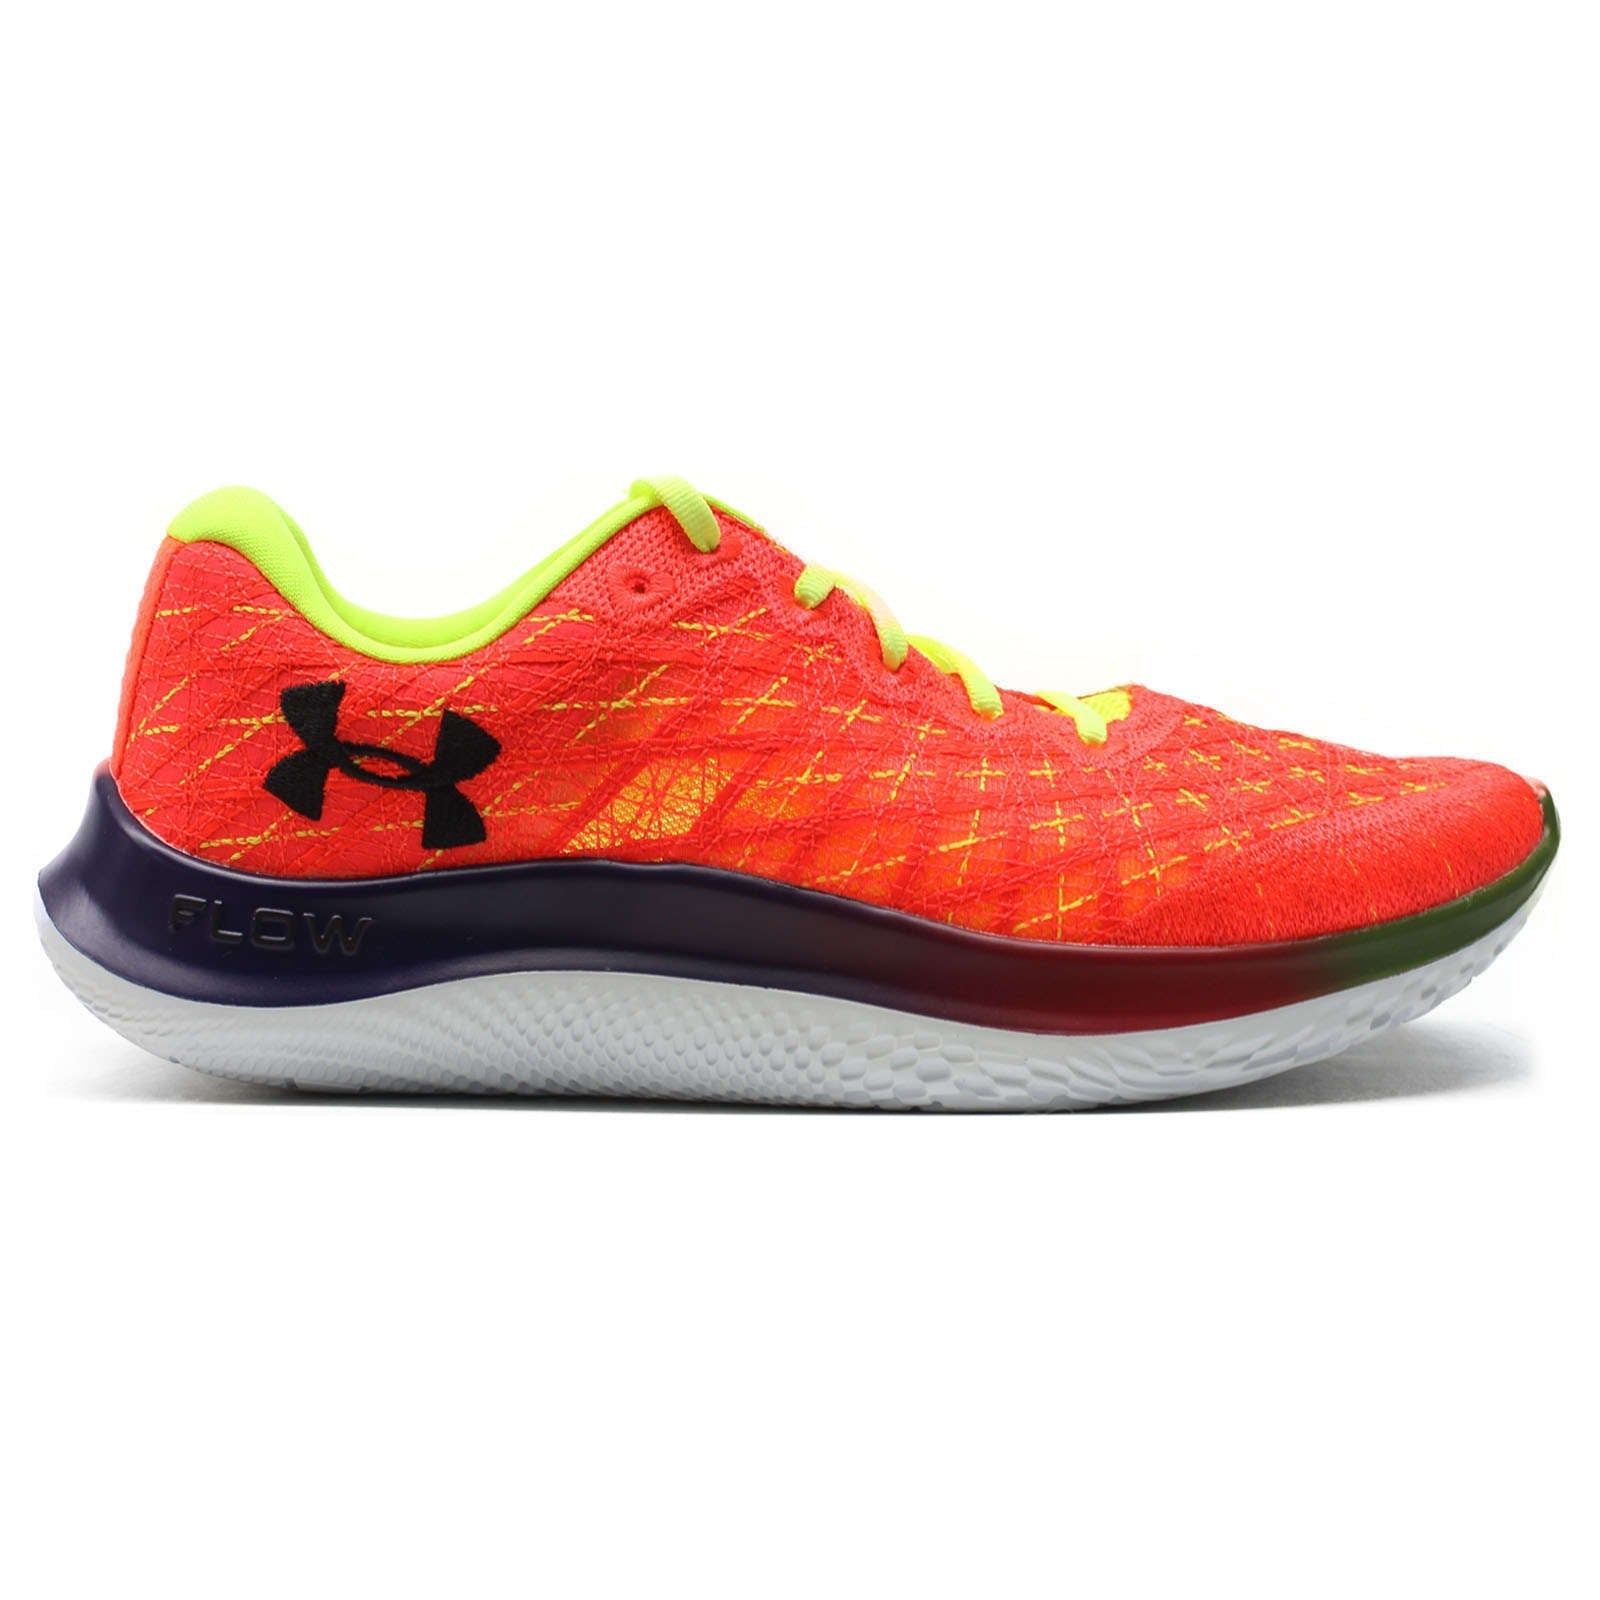 Under Armour Flow Velociti Wind Rn Synthetic Textile Unisex Low-Top Sneakers#color_orange yellow